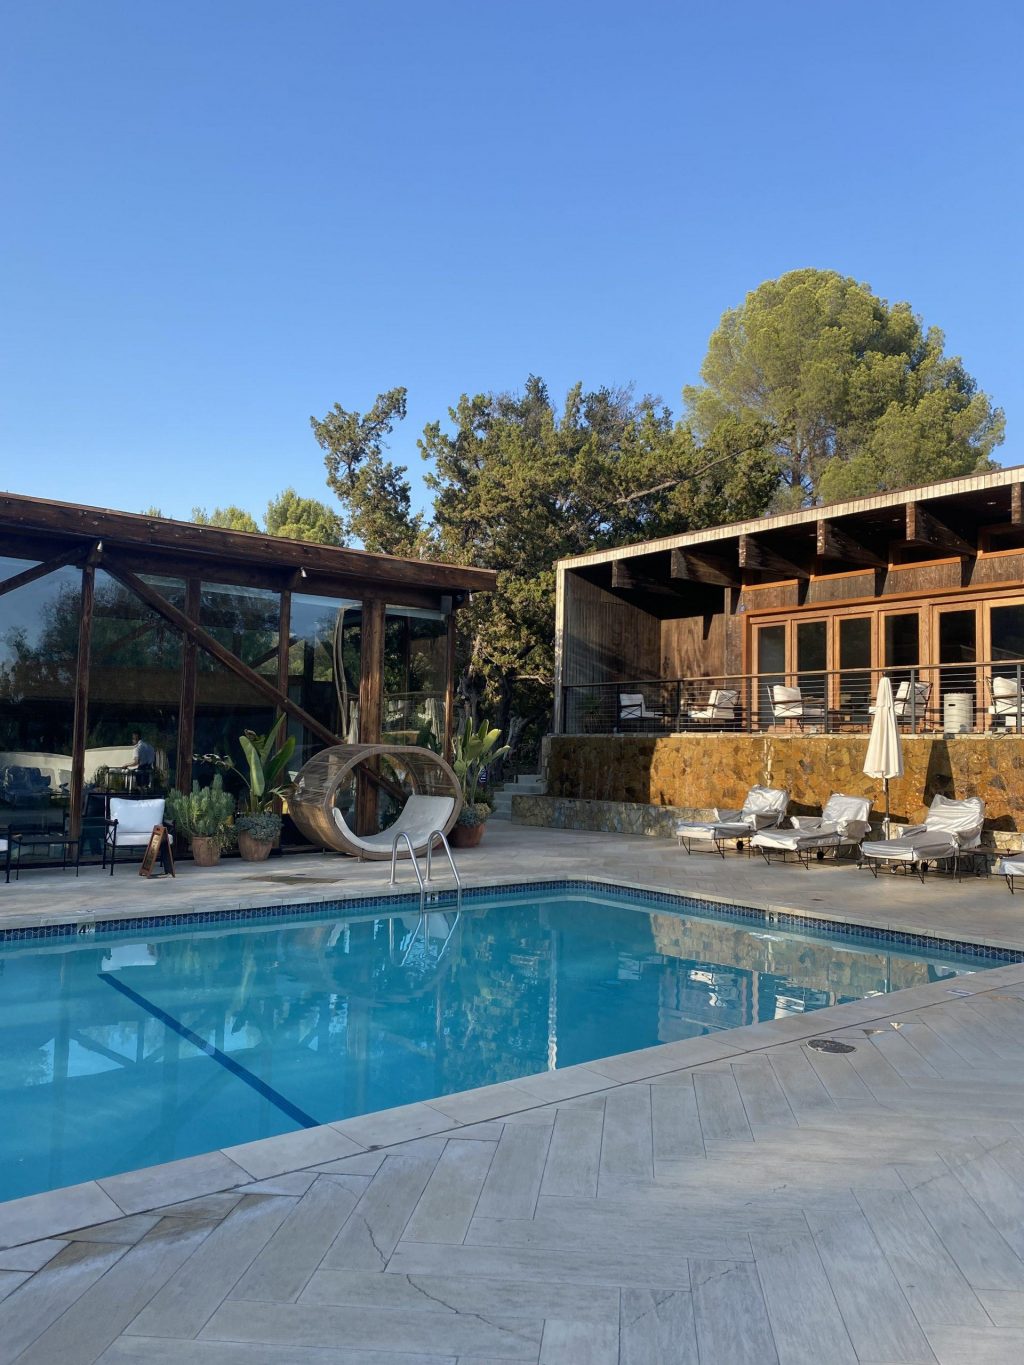 Calamigos Ranch has three pools, tennis courts, two restaurants, a spa and gym, all of which Pepperdine students access while living there. Around 50 students have lived at Calamigos each semester since 2013. Photo by Ashley Mowreader